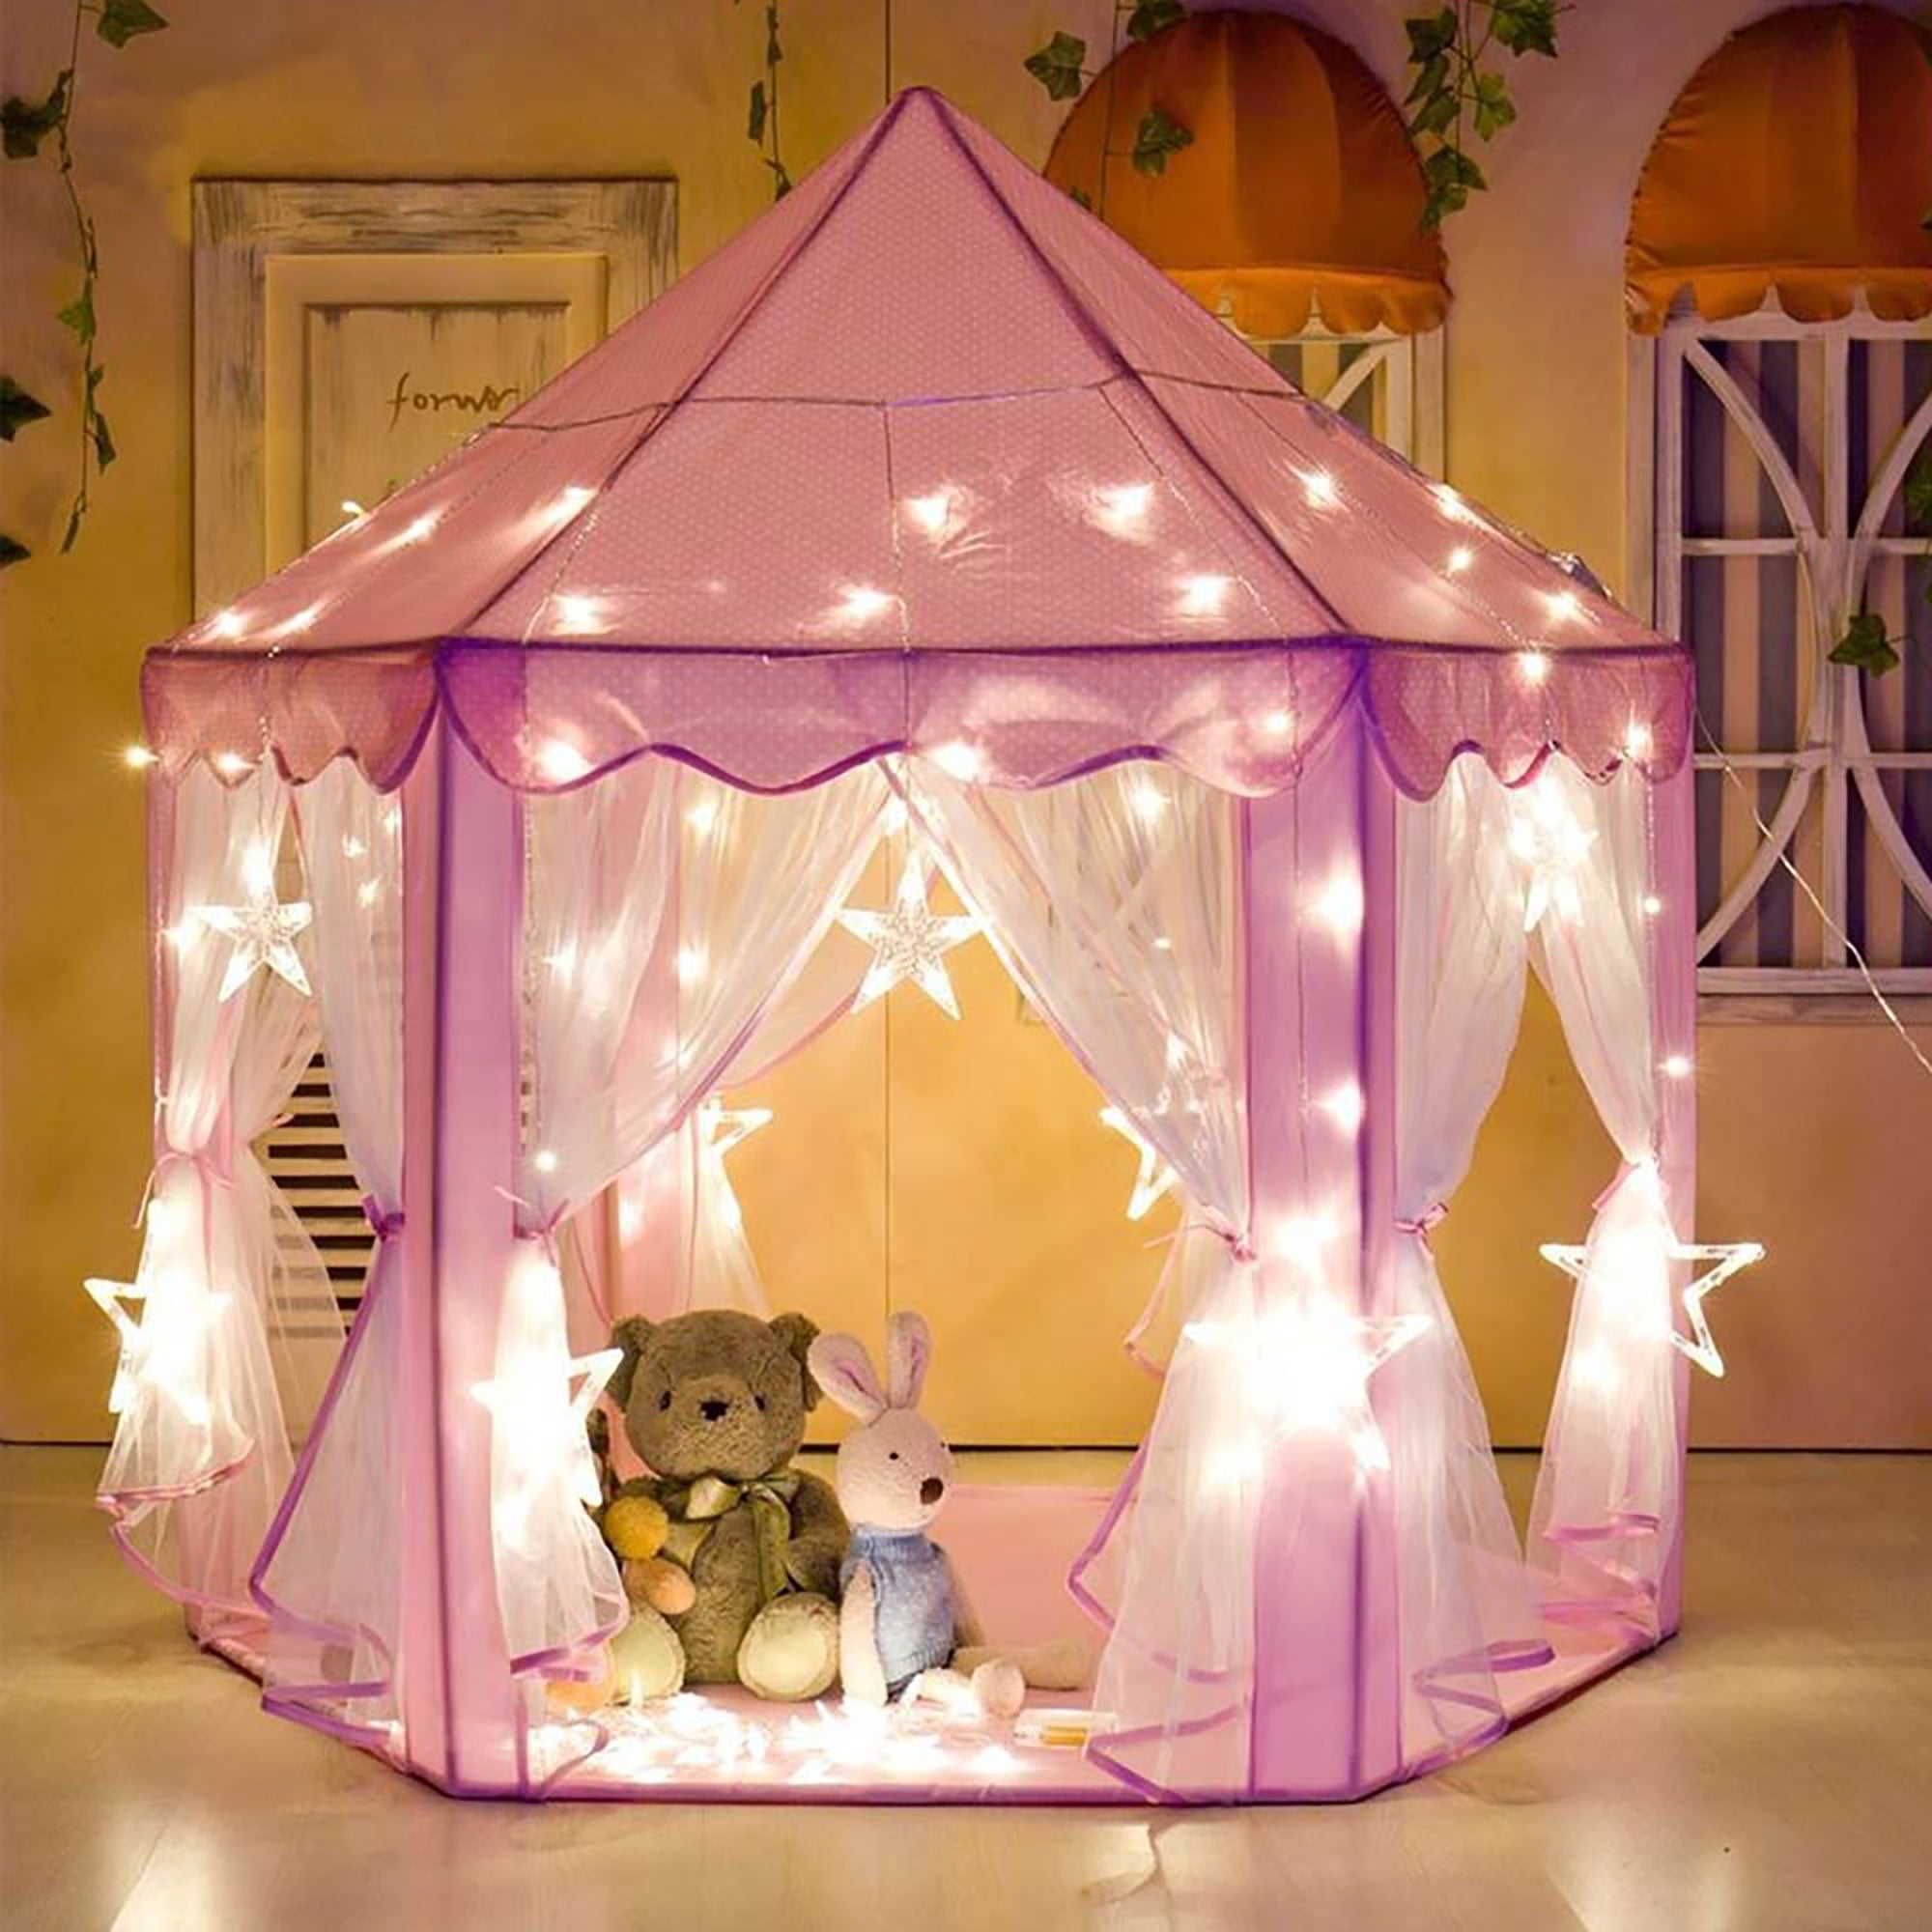 Details about   Princess Castle Play House Portable In/Outdoor Kids Play Tent for Girls Pink 